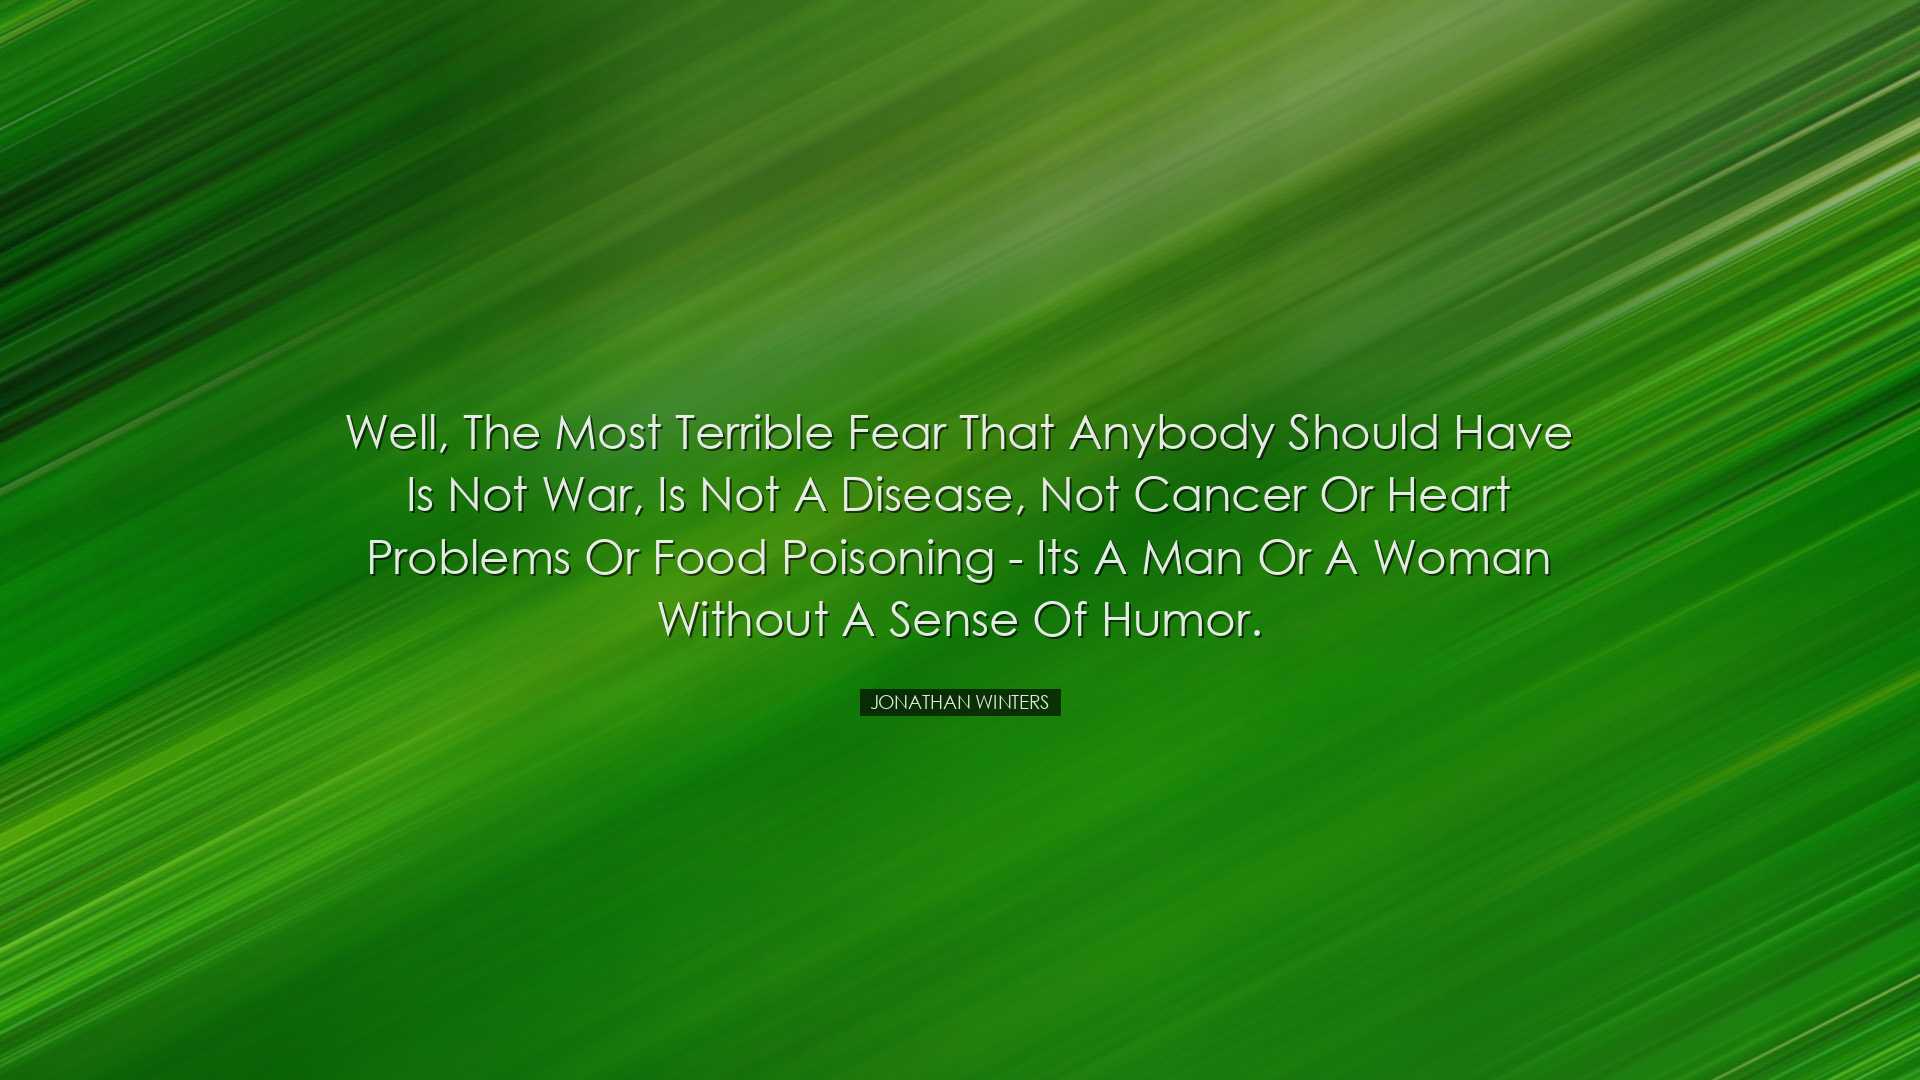 Well, the most terrible fear that anybody should have is not war,